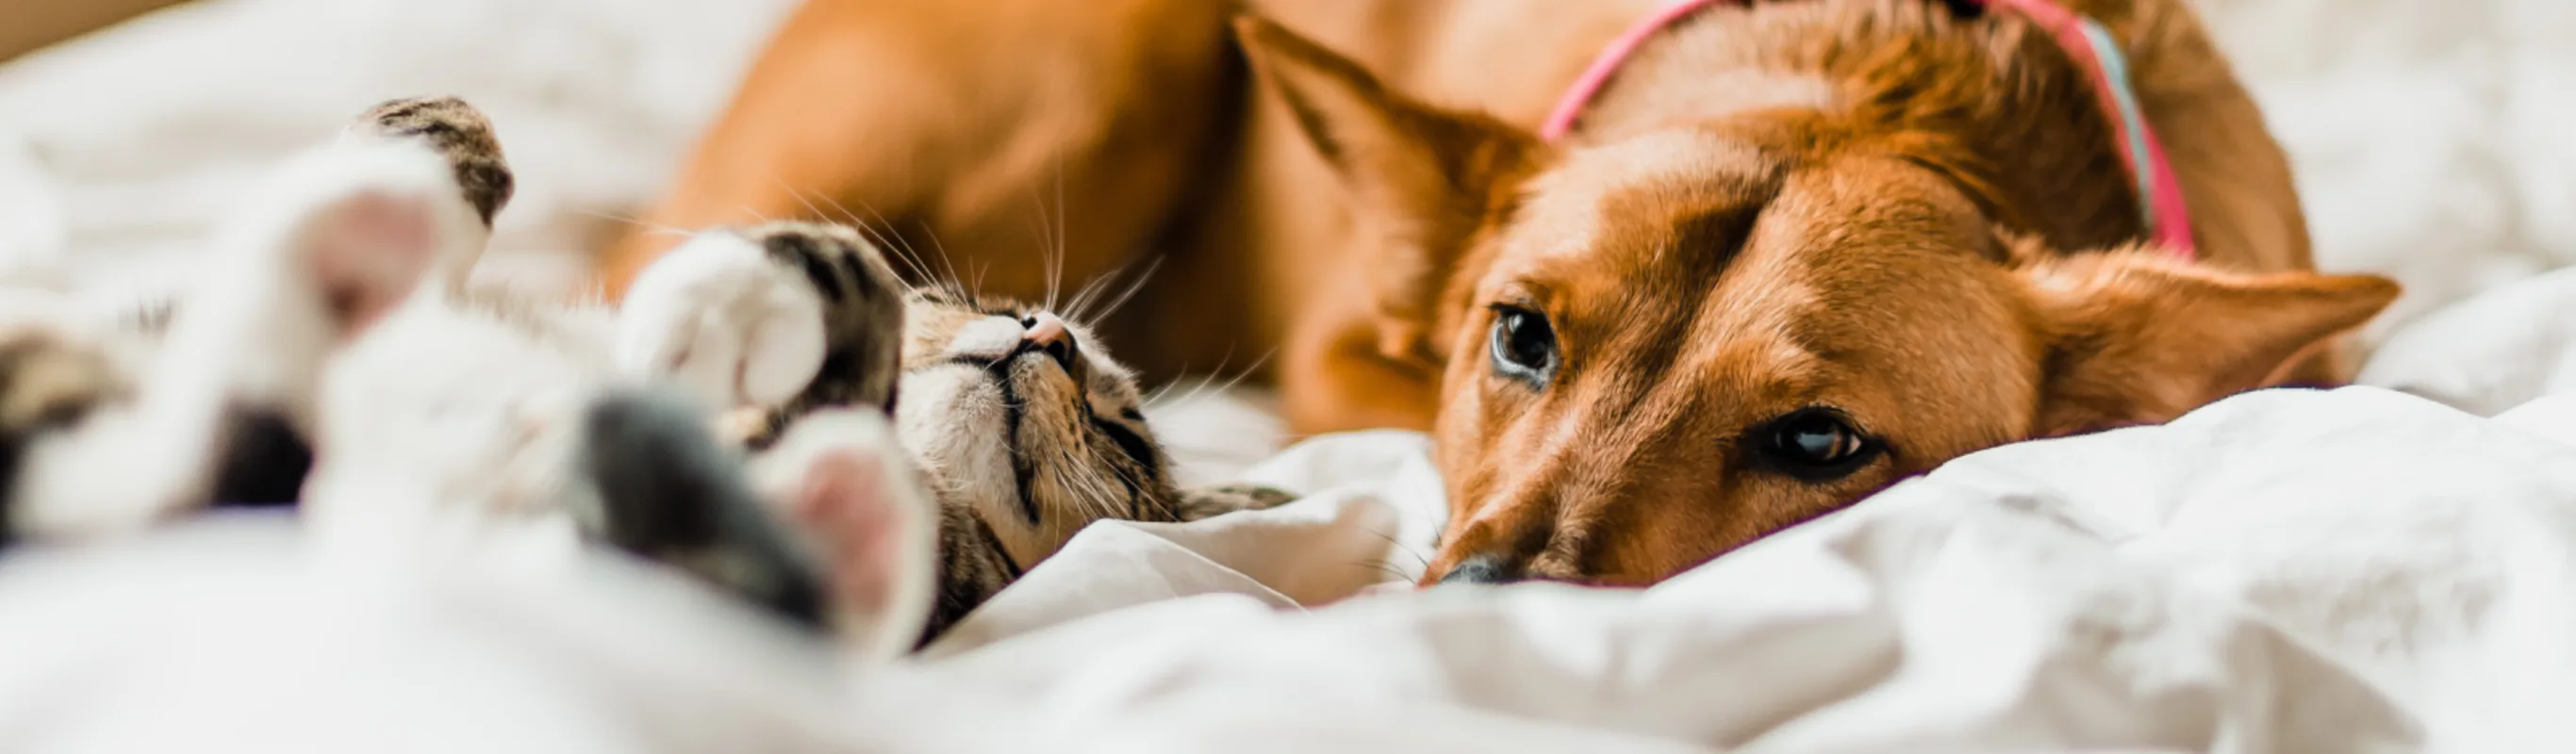 Calico Tabby Cat and Golden Labrador Retriever Are Laying On A Blanket For PAW Plans